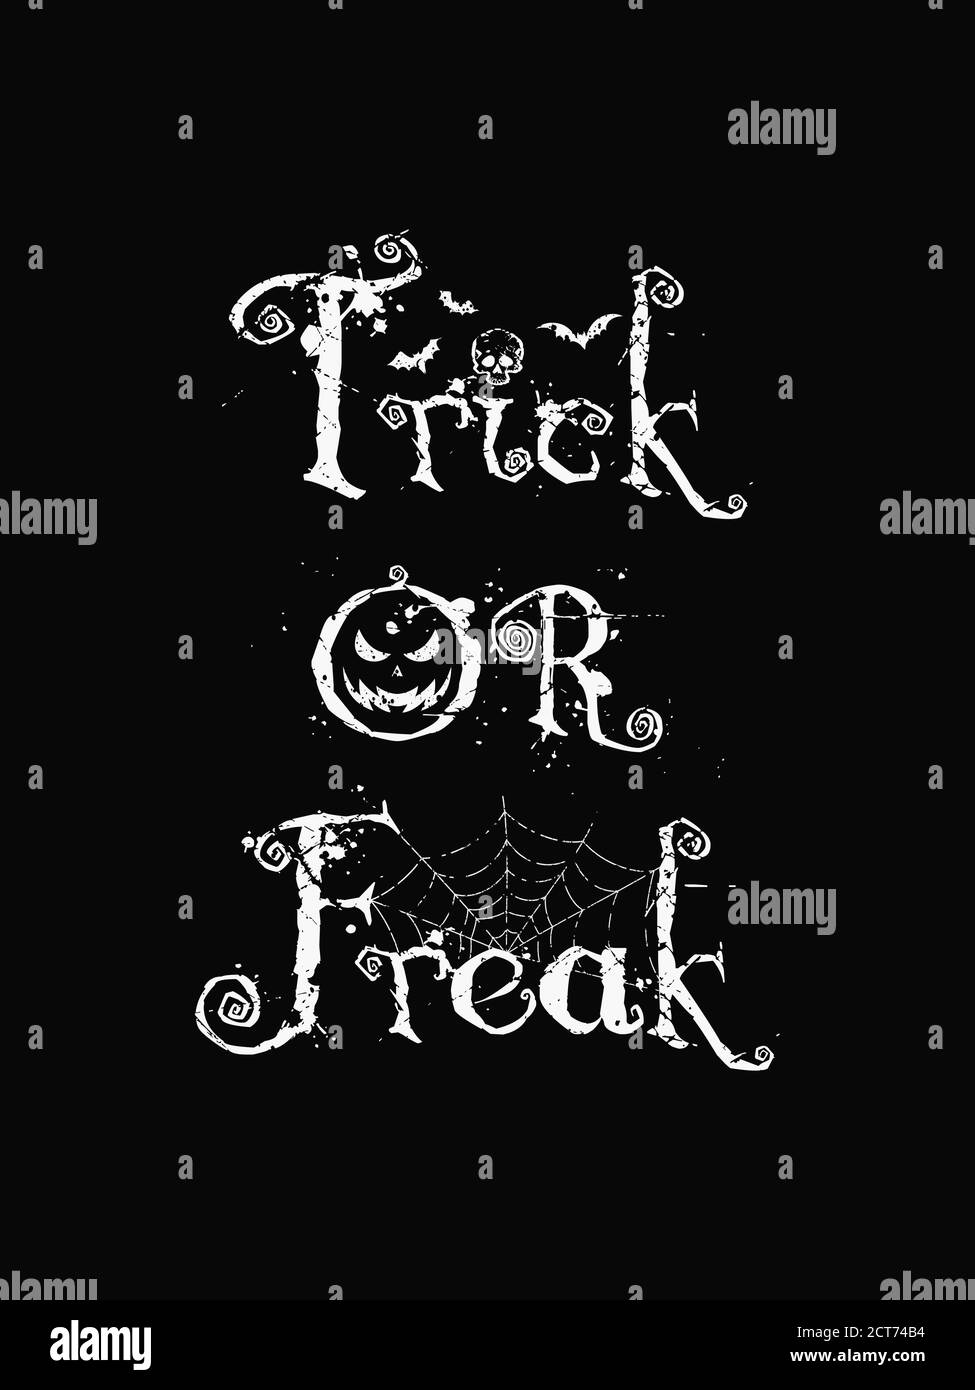 Trick or freak, funny text art illustration with different halloween symbols as jack o'lantern, skull, bats and spider web isolated on dark background Stock Photo